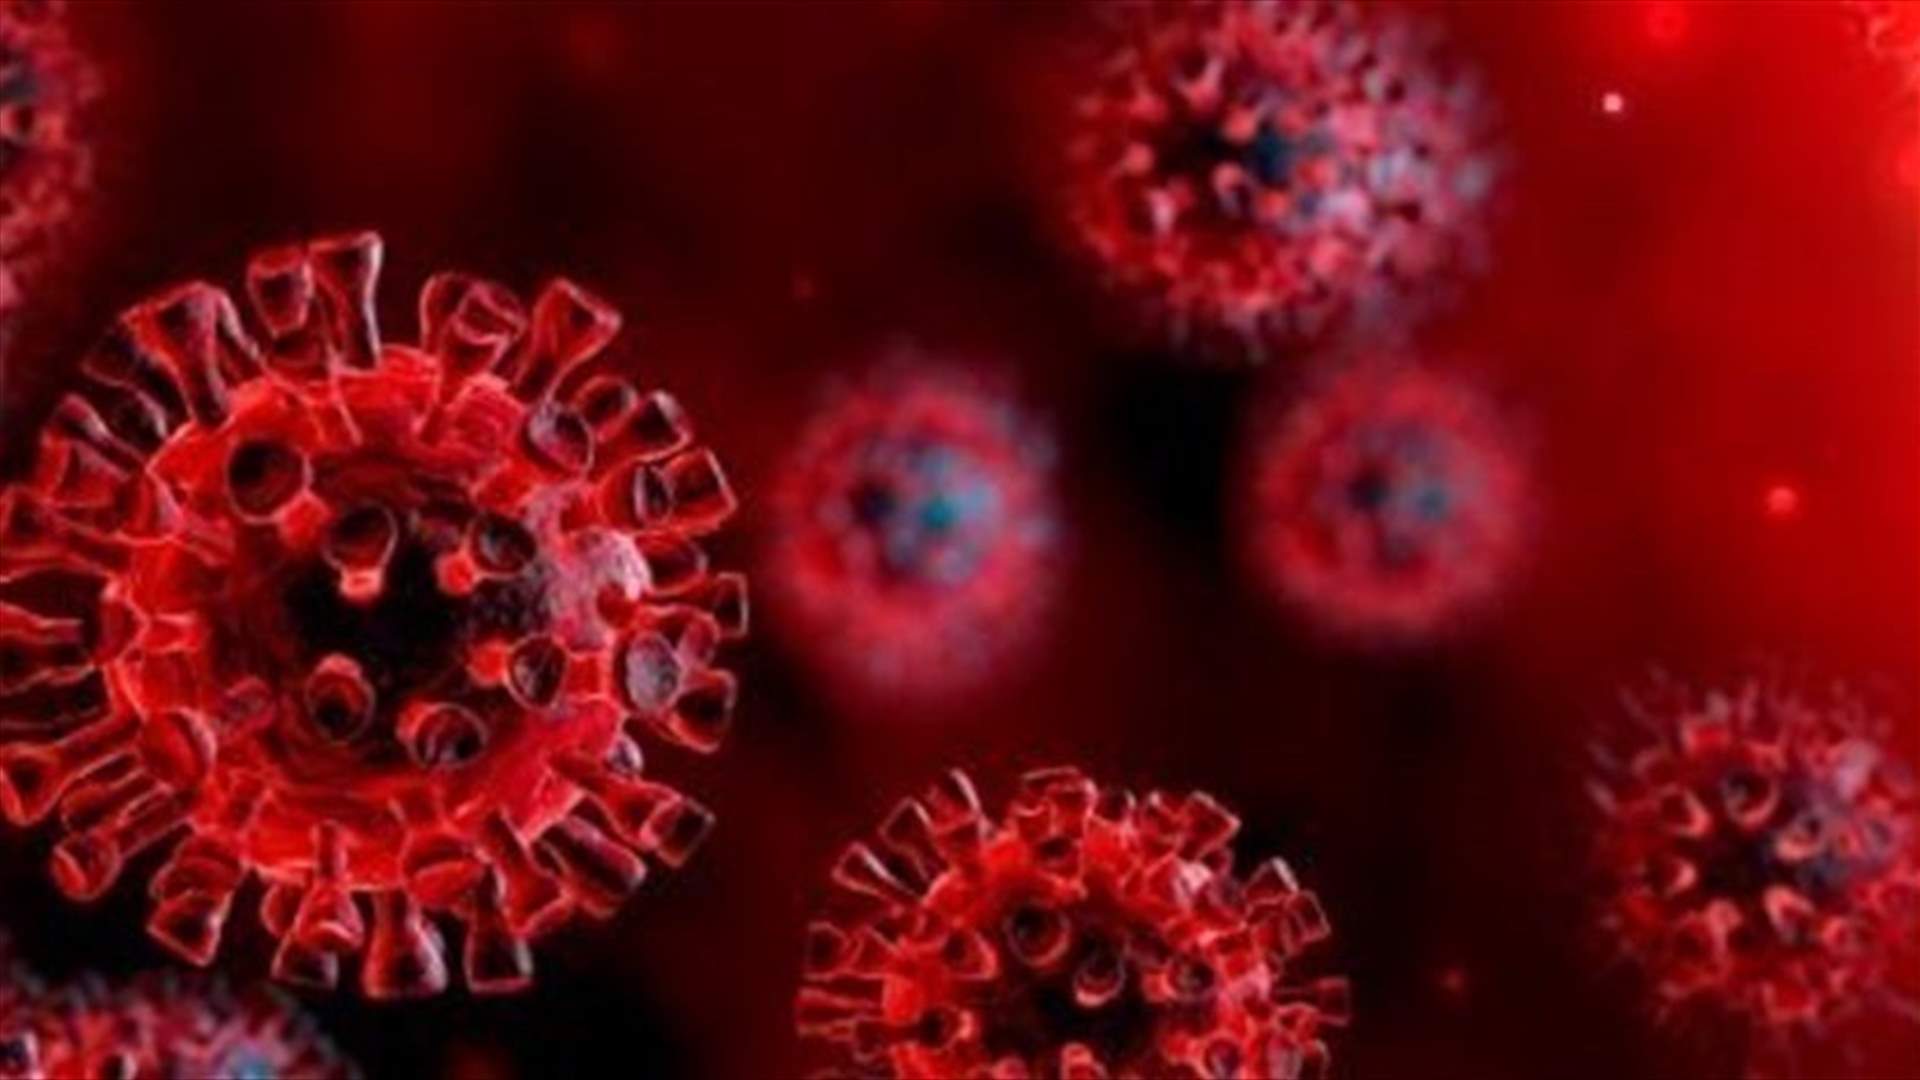 Health Ministry confirms 2245 new Coronavirus cases, 2 more deaths